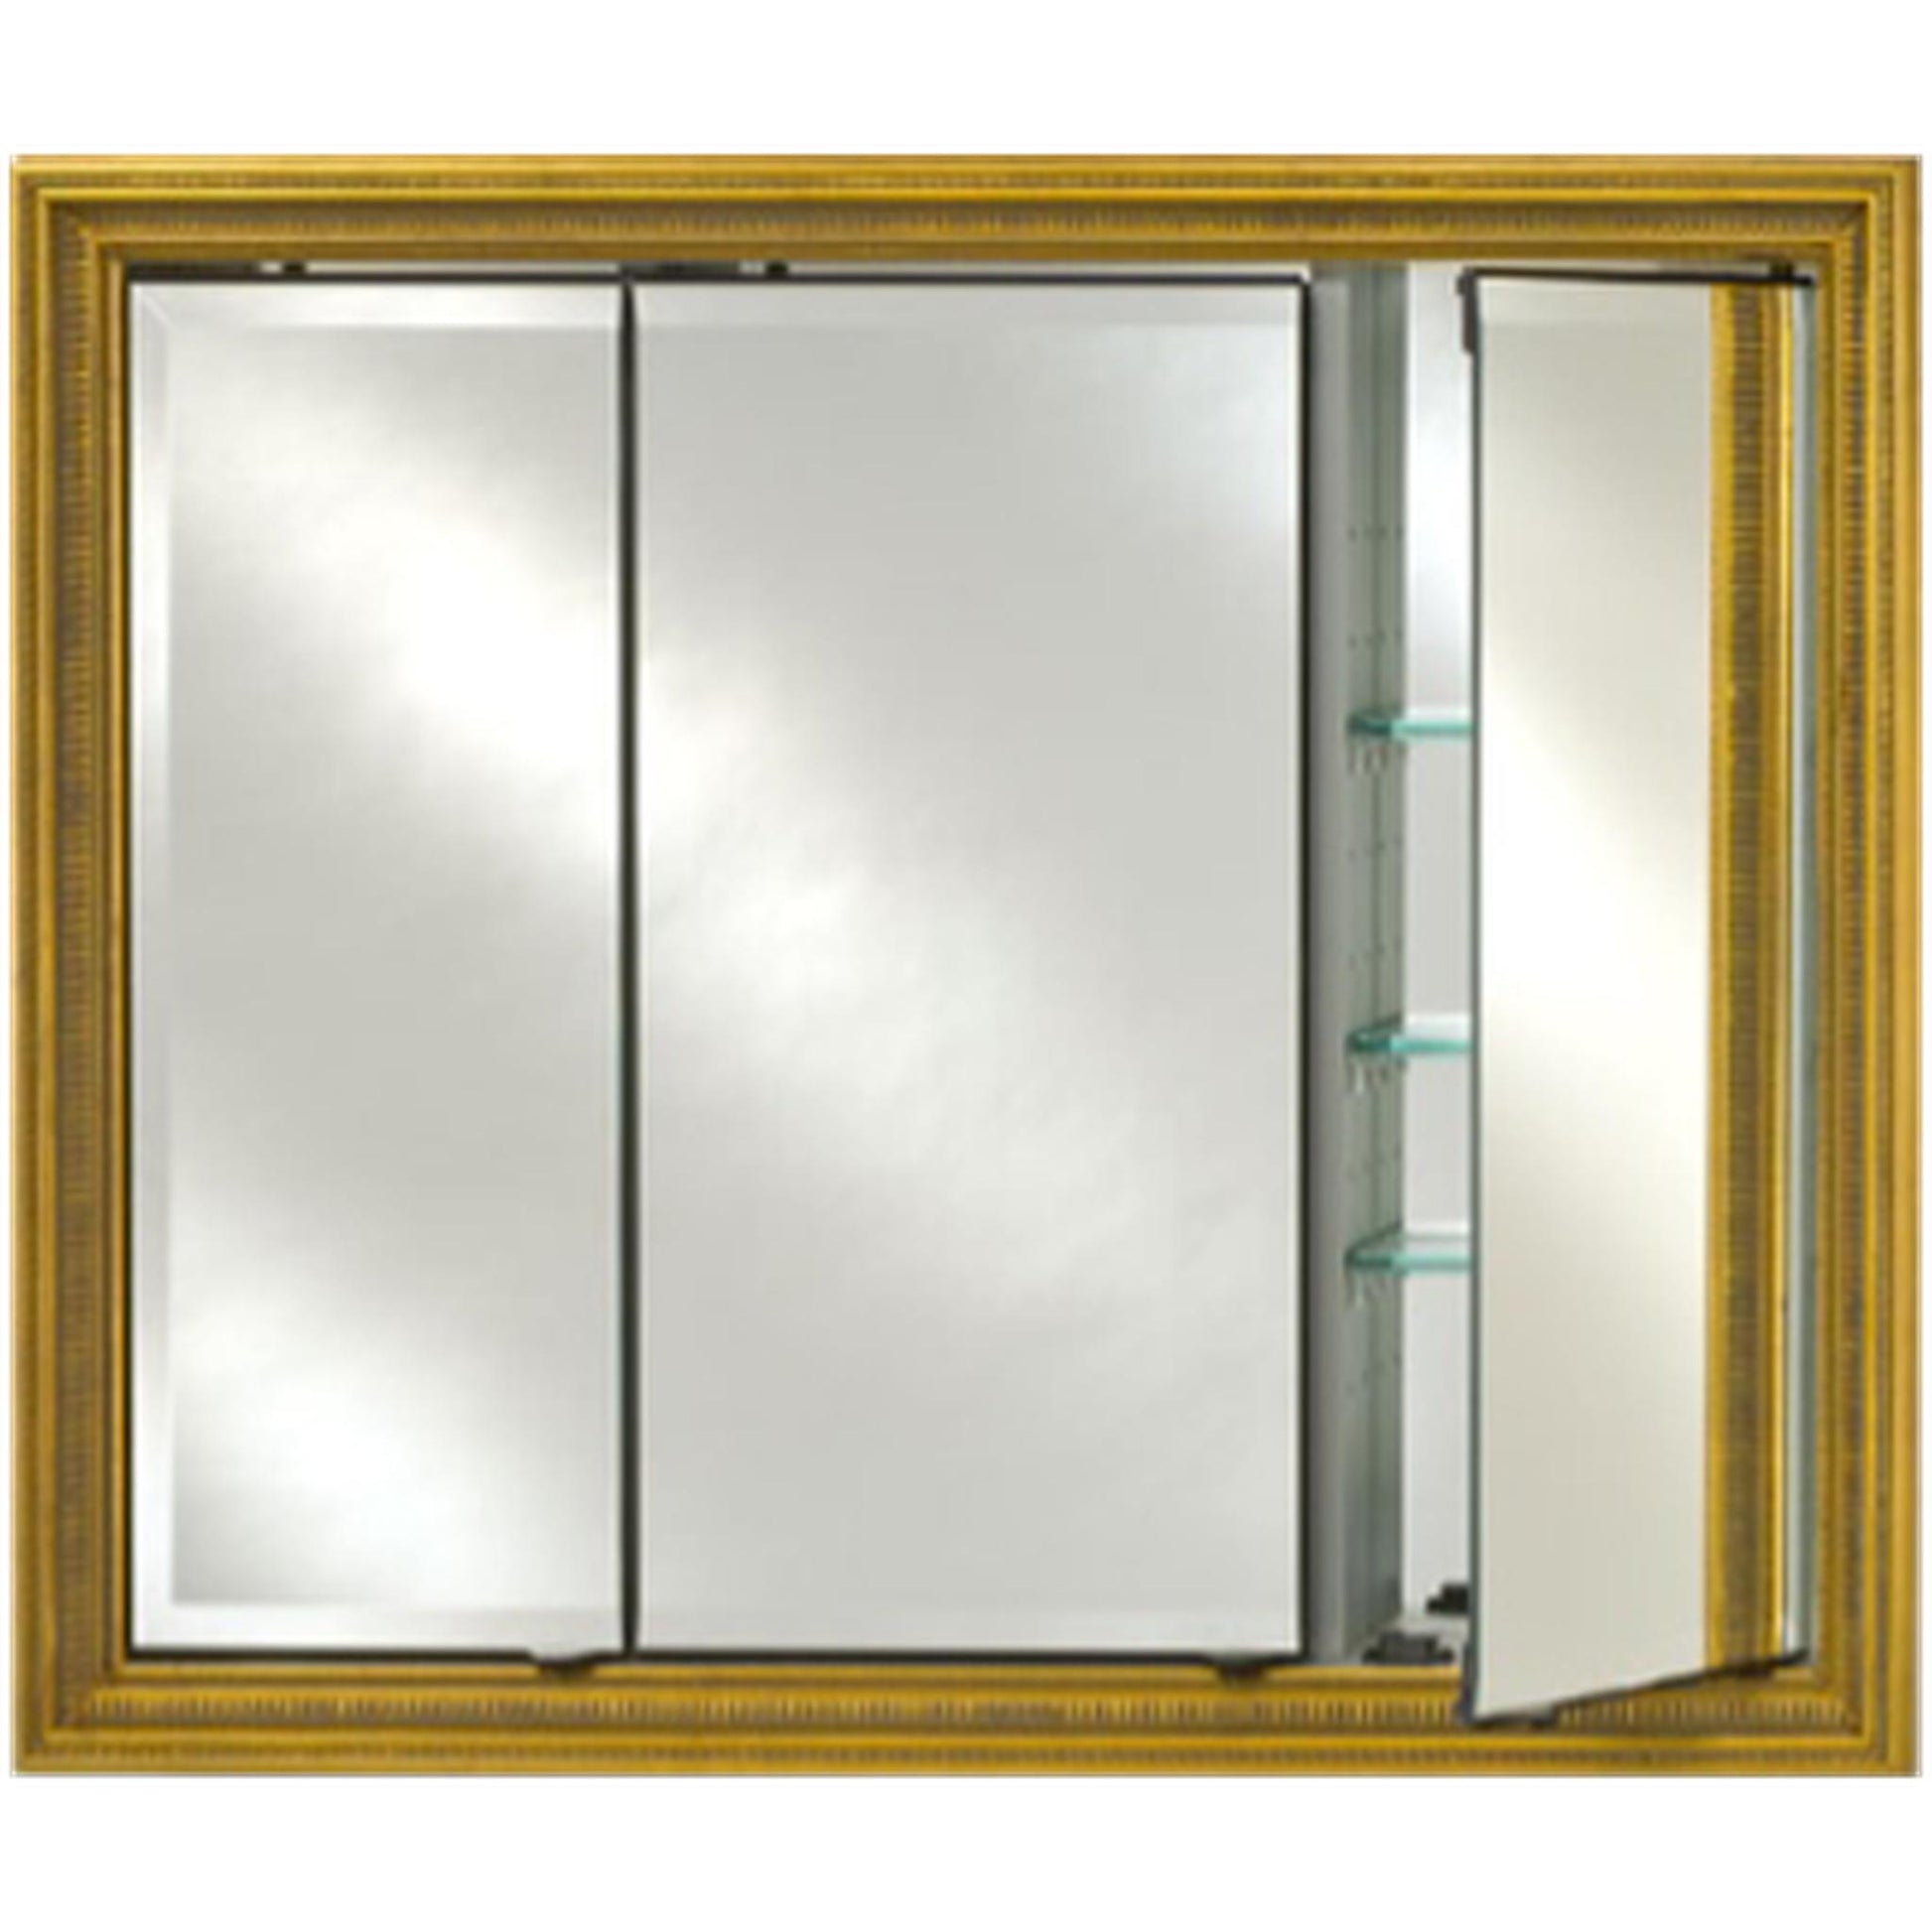 Afina Signature 34" x 30" Polished Glimmer-Flat Recessed Triple Door Medicine Cabinet With Beveled Edge Mirror